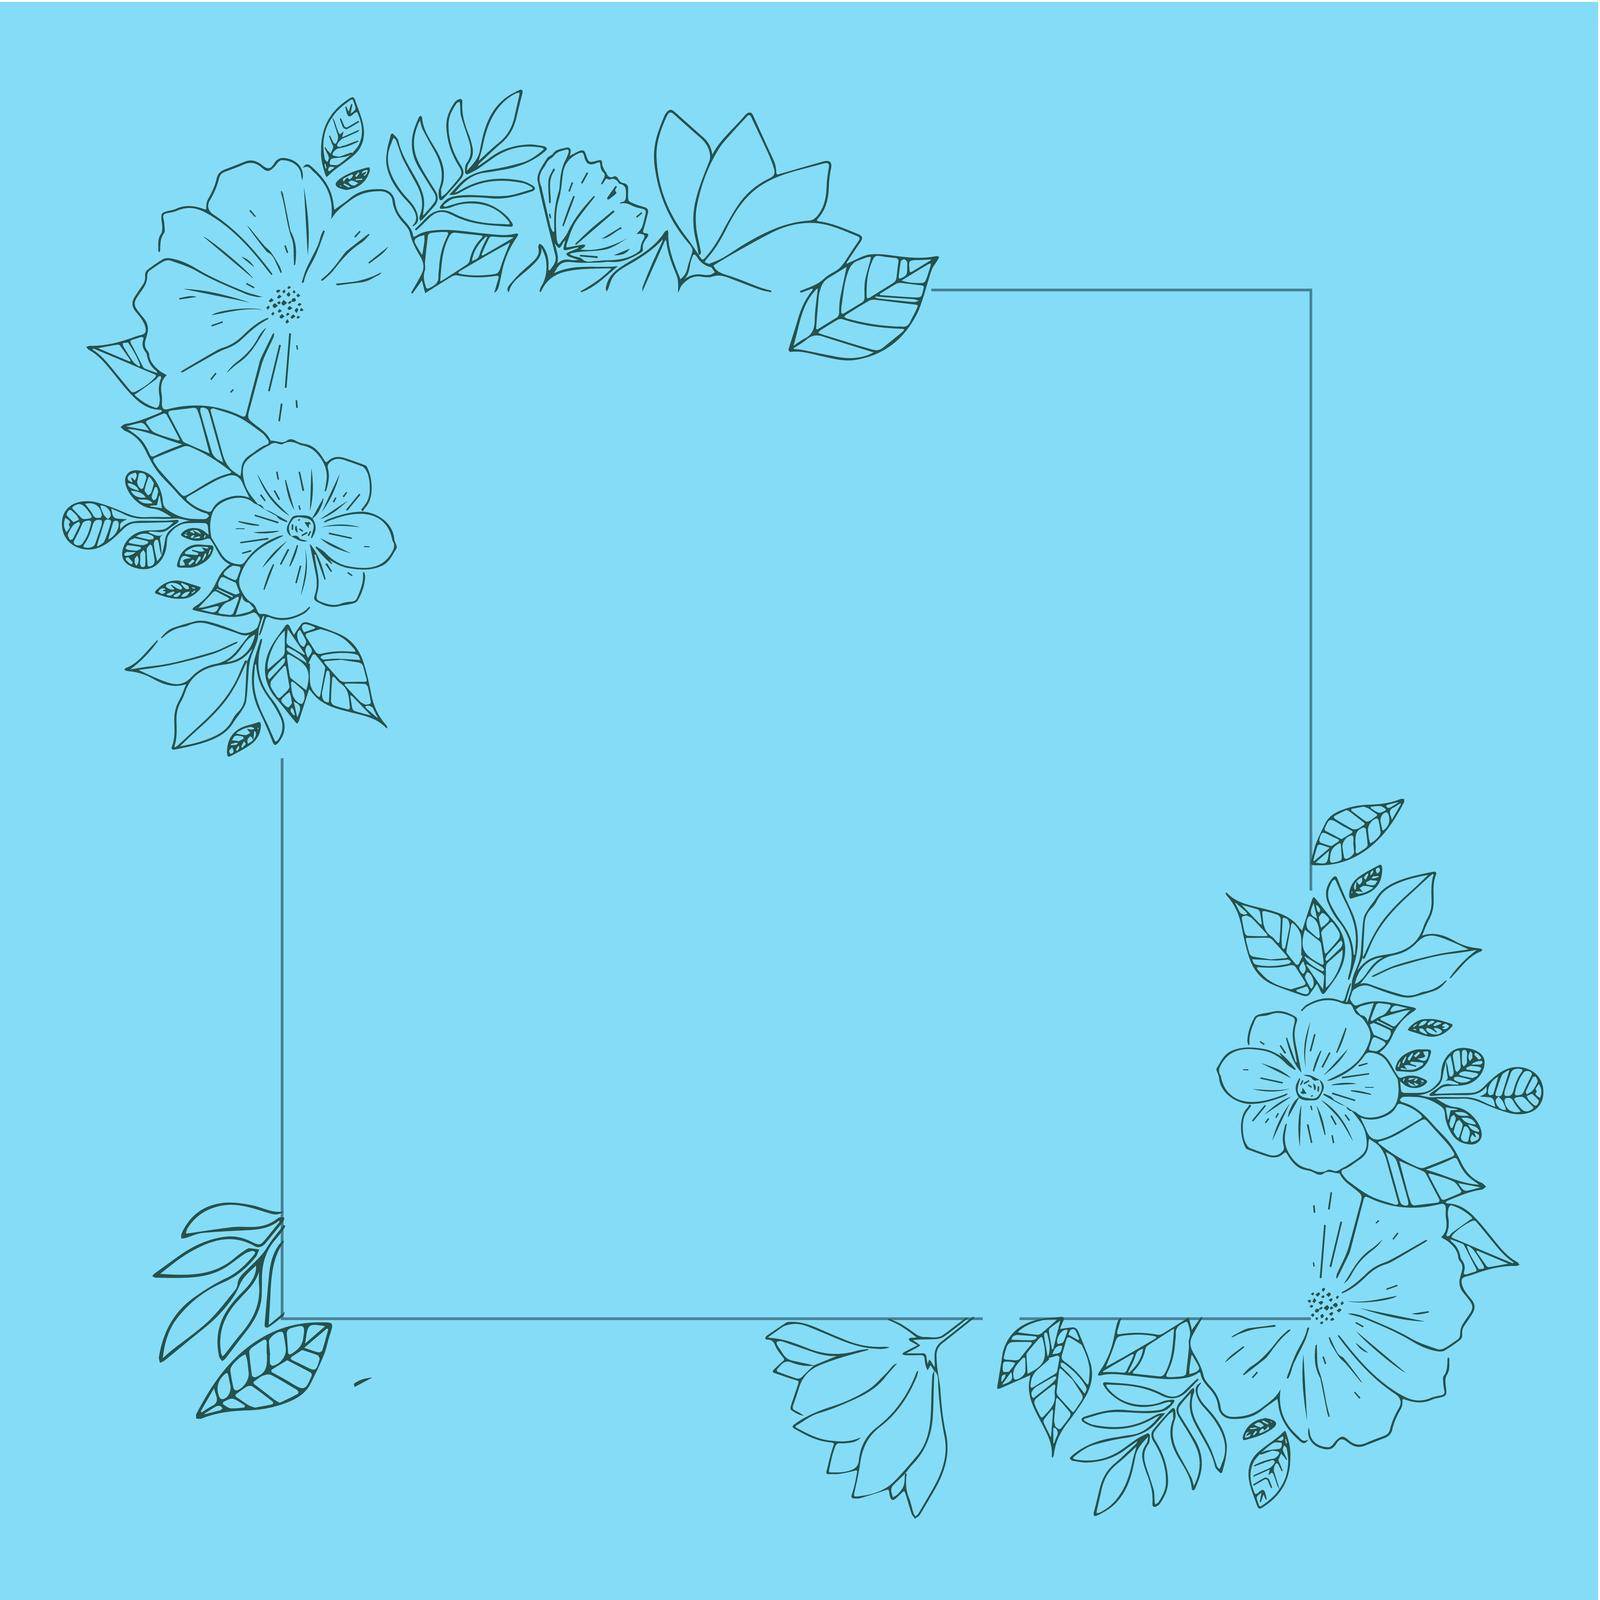 Blank Frame Decorated With Abstract Modernized Forms Flowers And Foliage. Empty Modern Border Surrounded By Multicolored Line Symbols Organized Pleasantly. by nialowwa